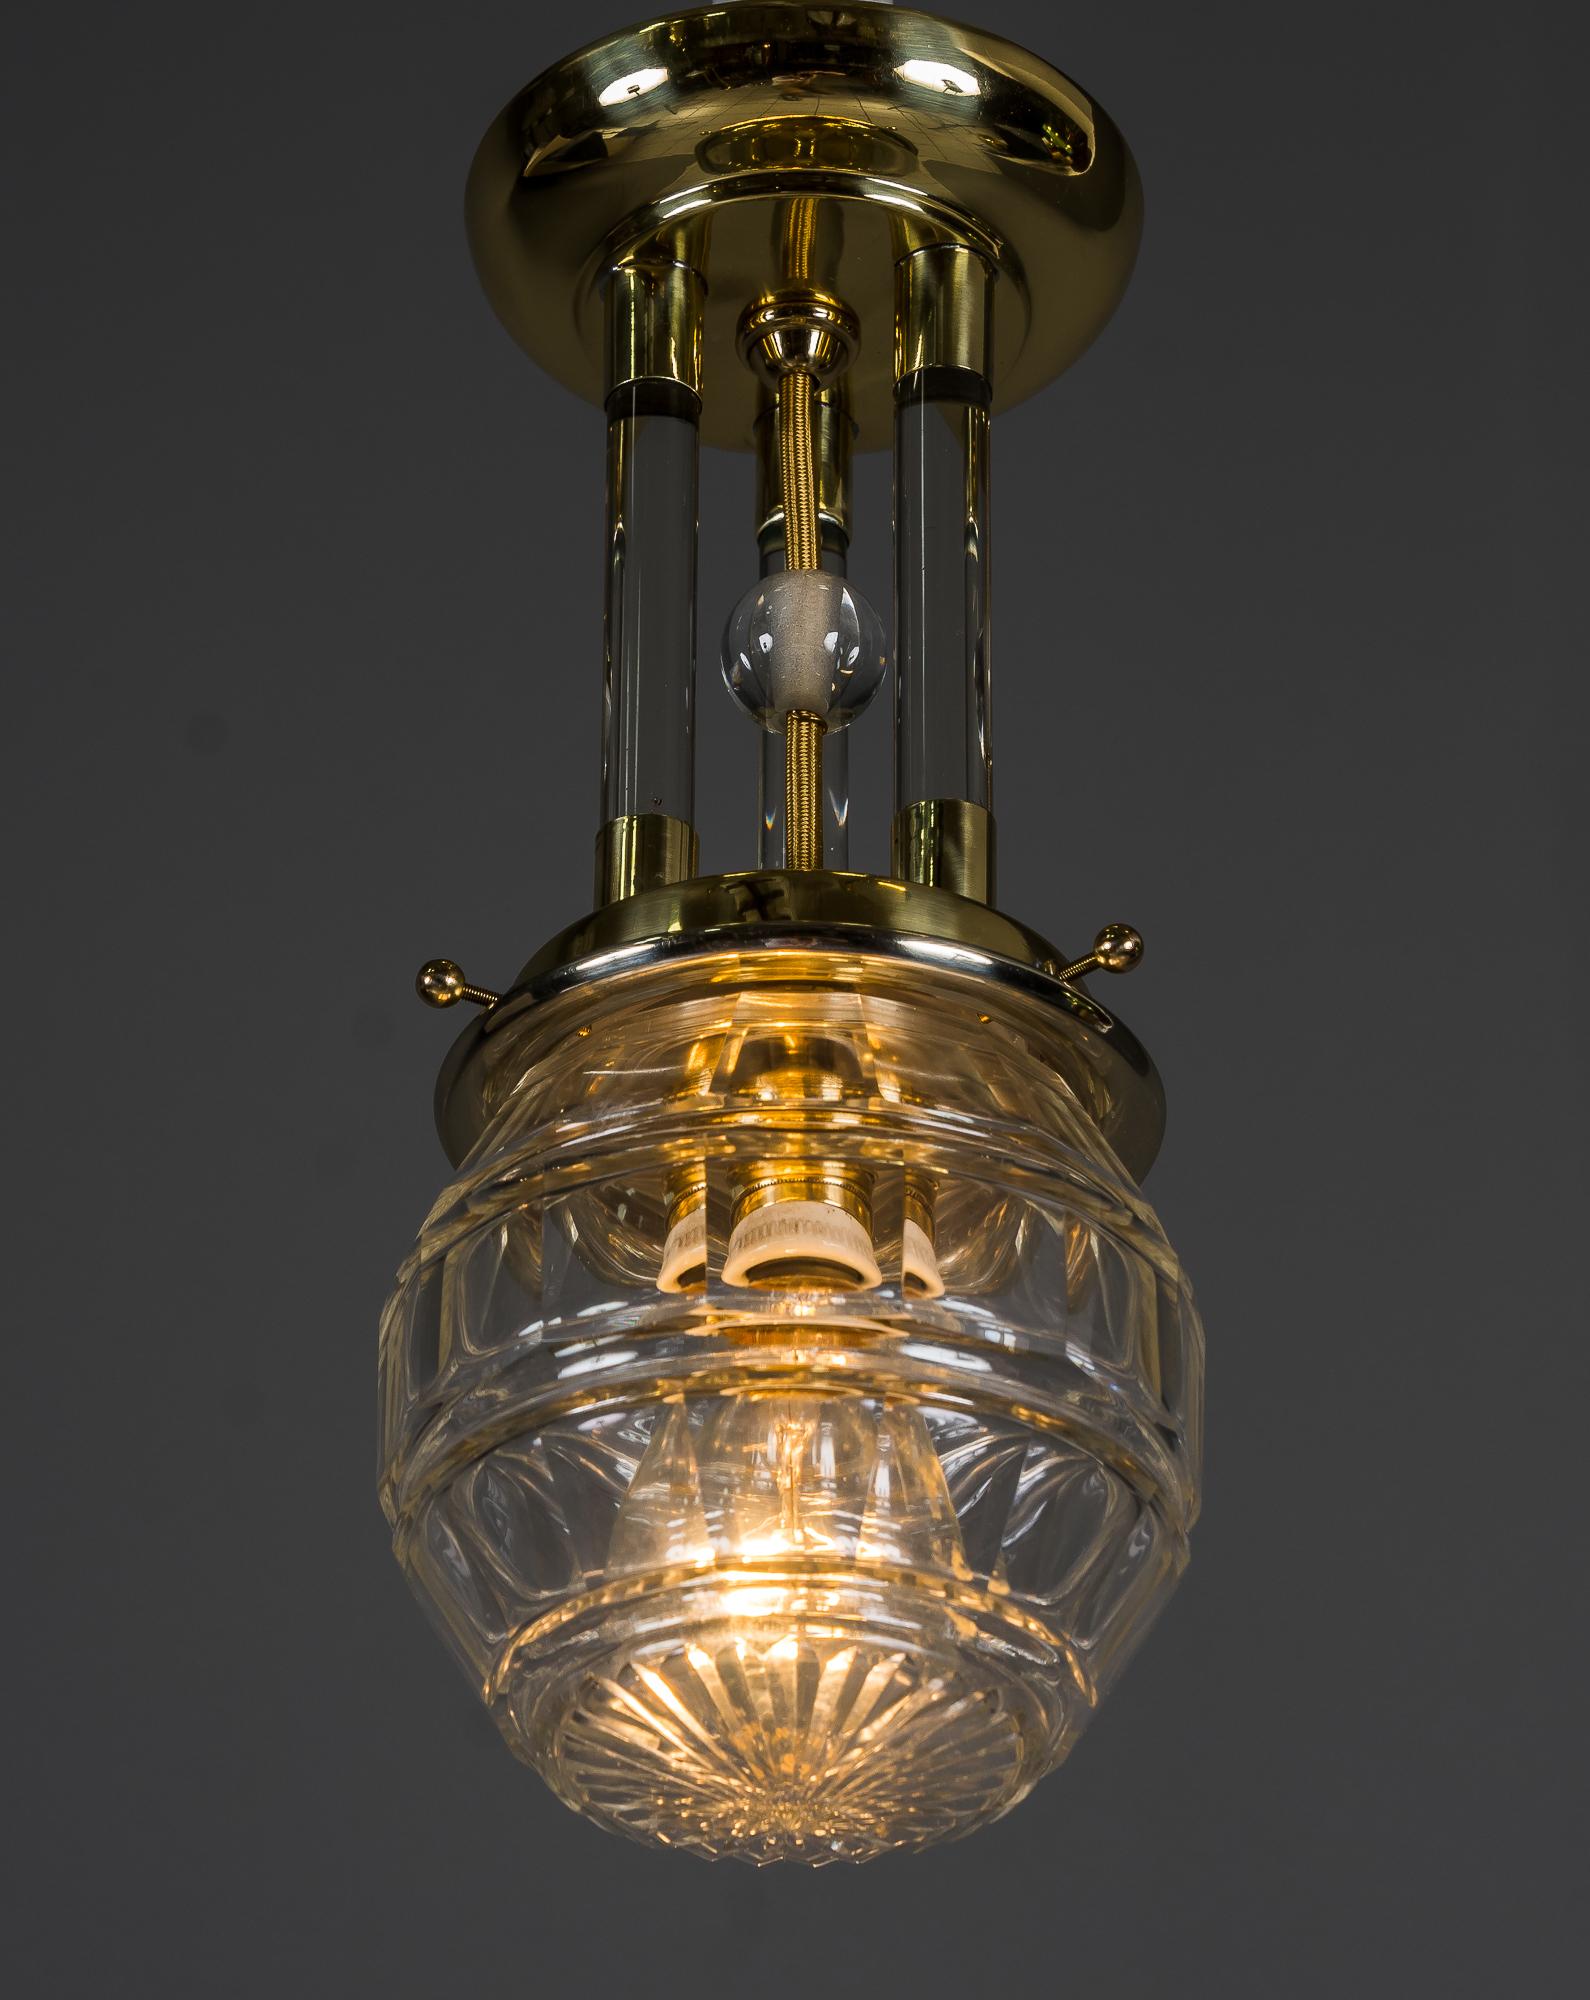 Early 20th Century Art Deco Ceiling Lamp with Original Old Cut Glass Shade, Vienna, Around 1920s